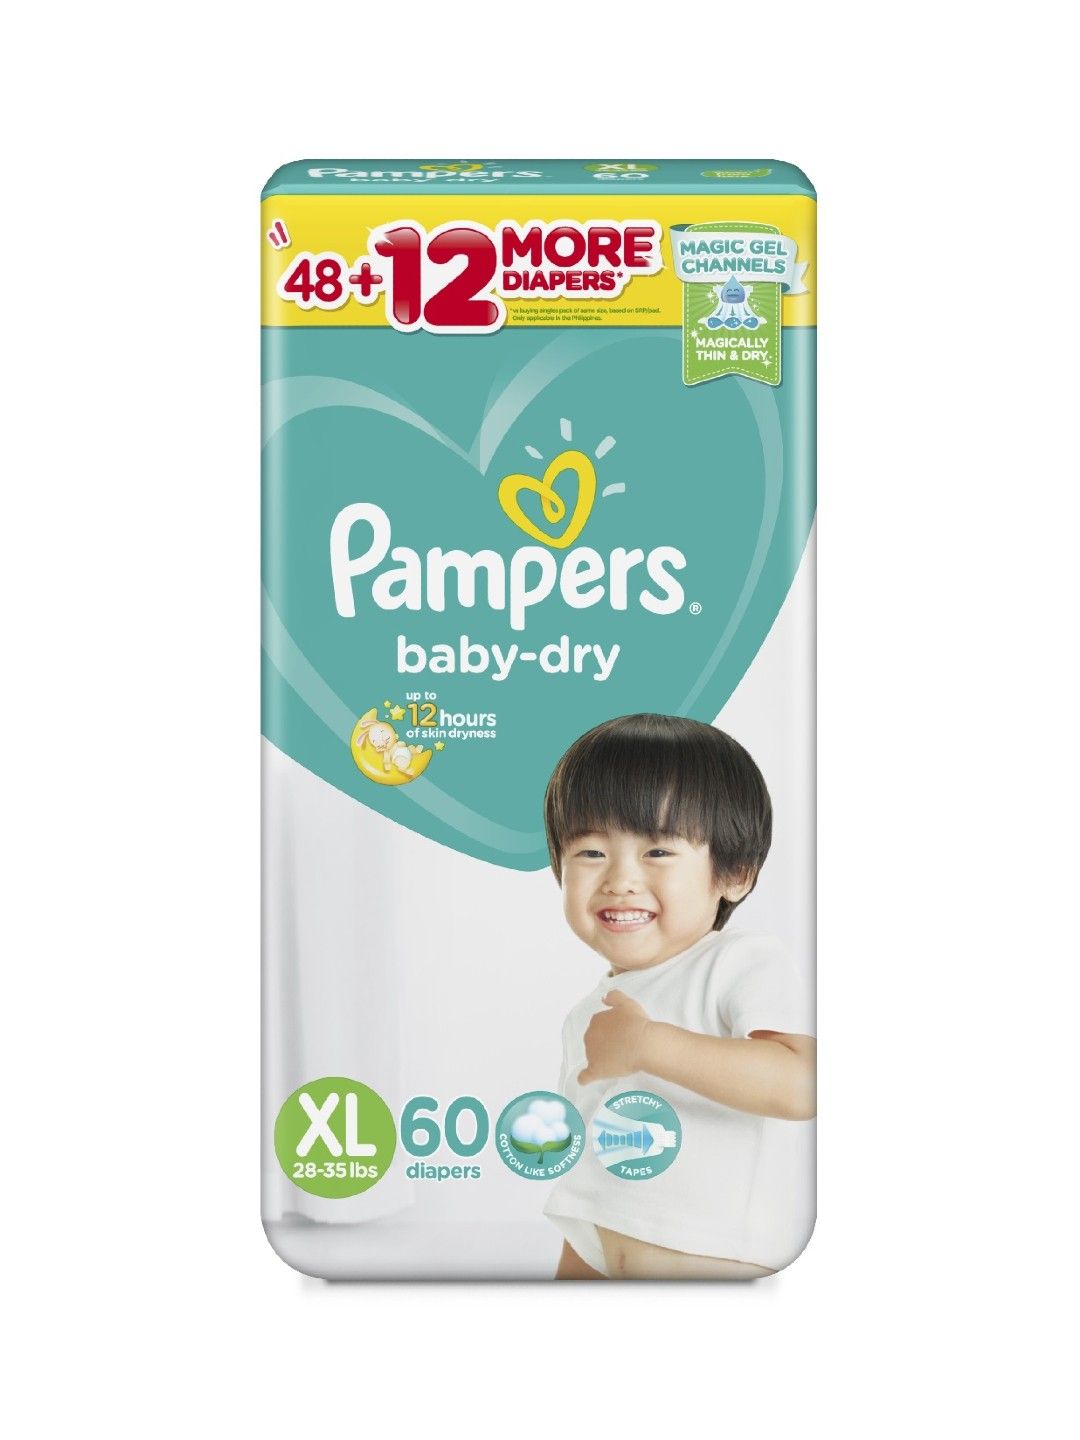 Pampers Baby Dry Taped XL 60s x 1 pack (60 pcs)